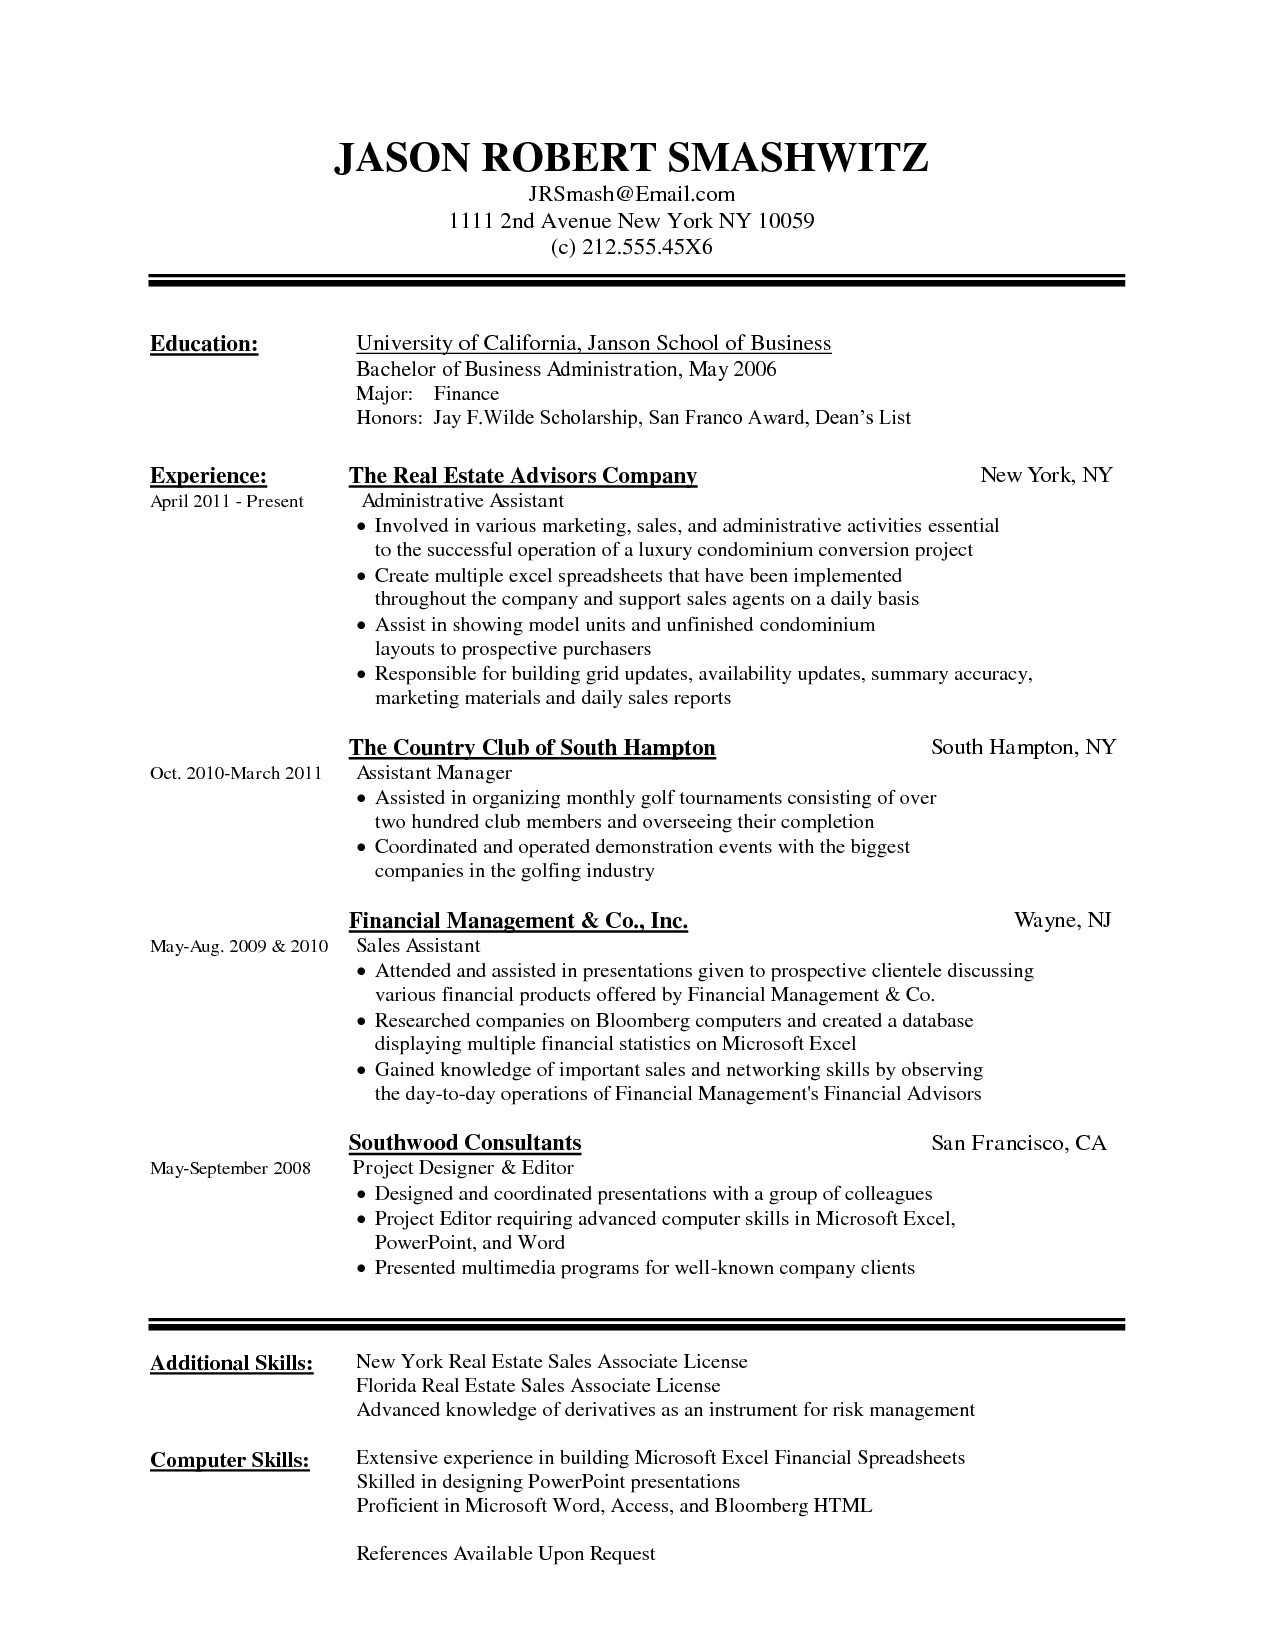 Awesome Resume Templates For Word 2010 – Superkepo In Resume Templates Word 2010